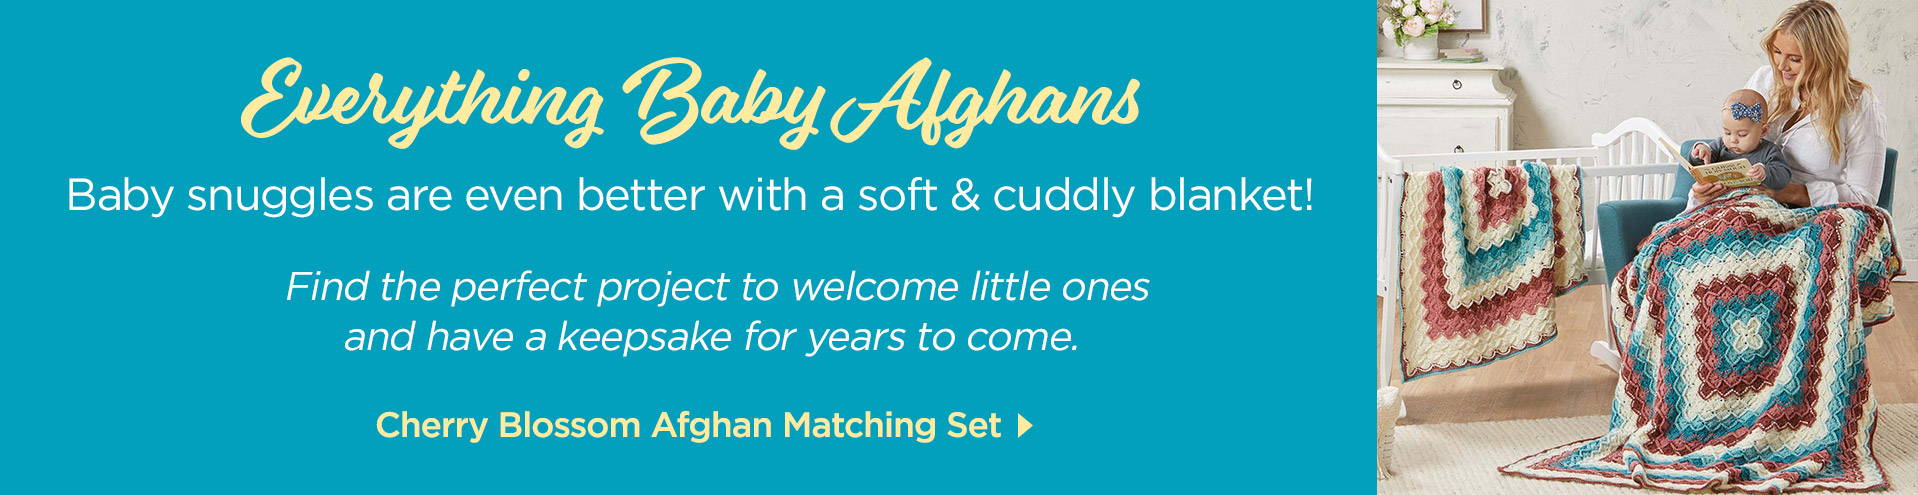 Baby snuggles are even better with a soft and cuddly blanket! Find the perfect project to welcome little ones and have a keepsake for years to come. 